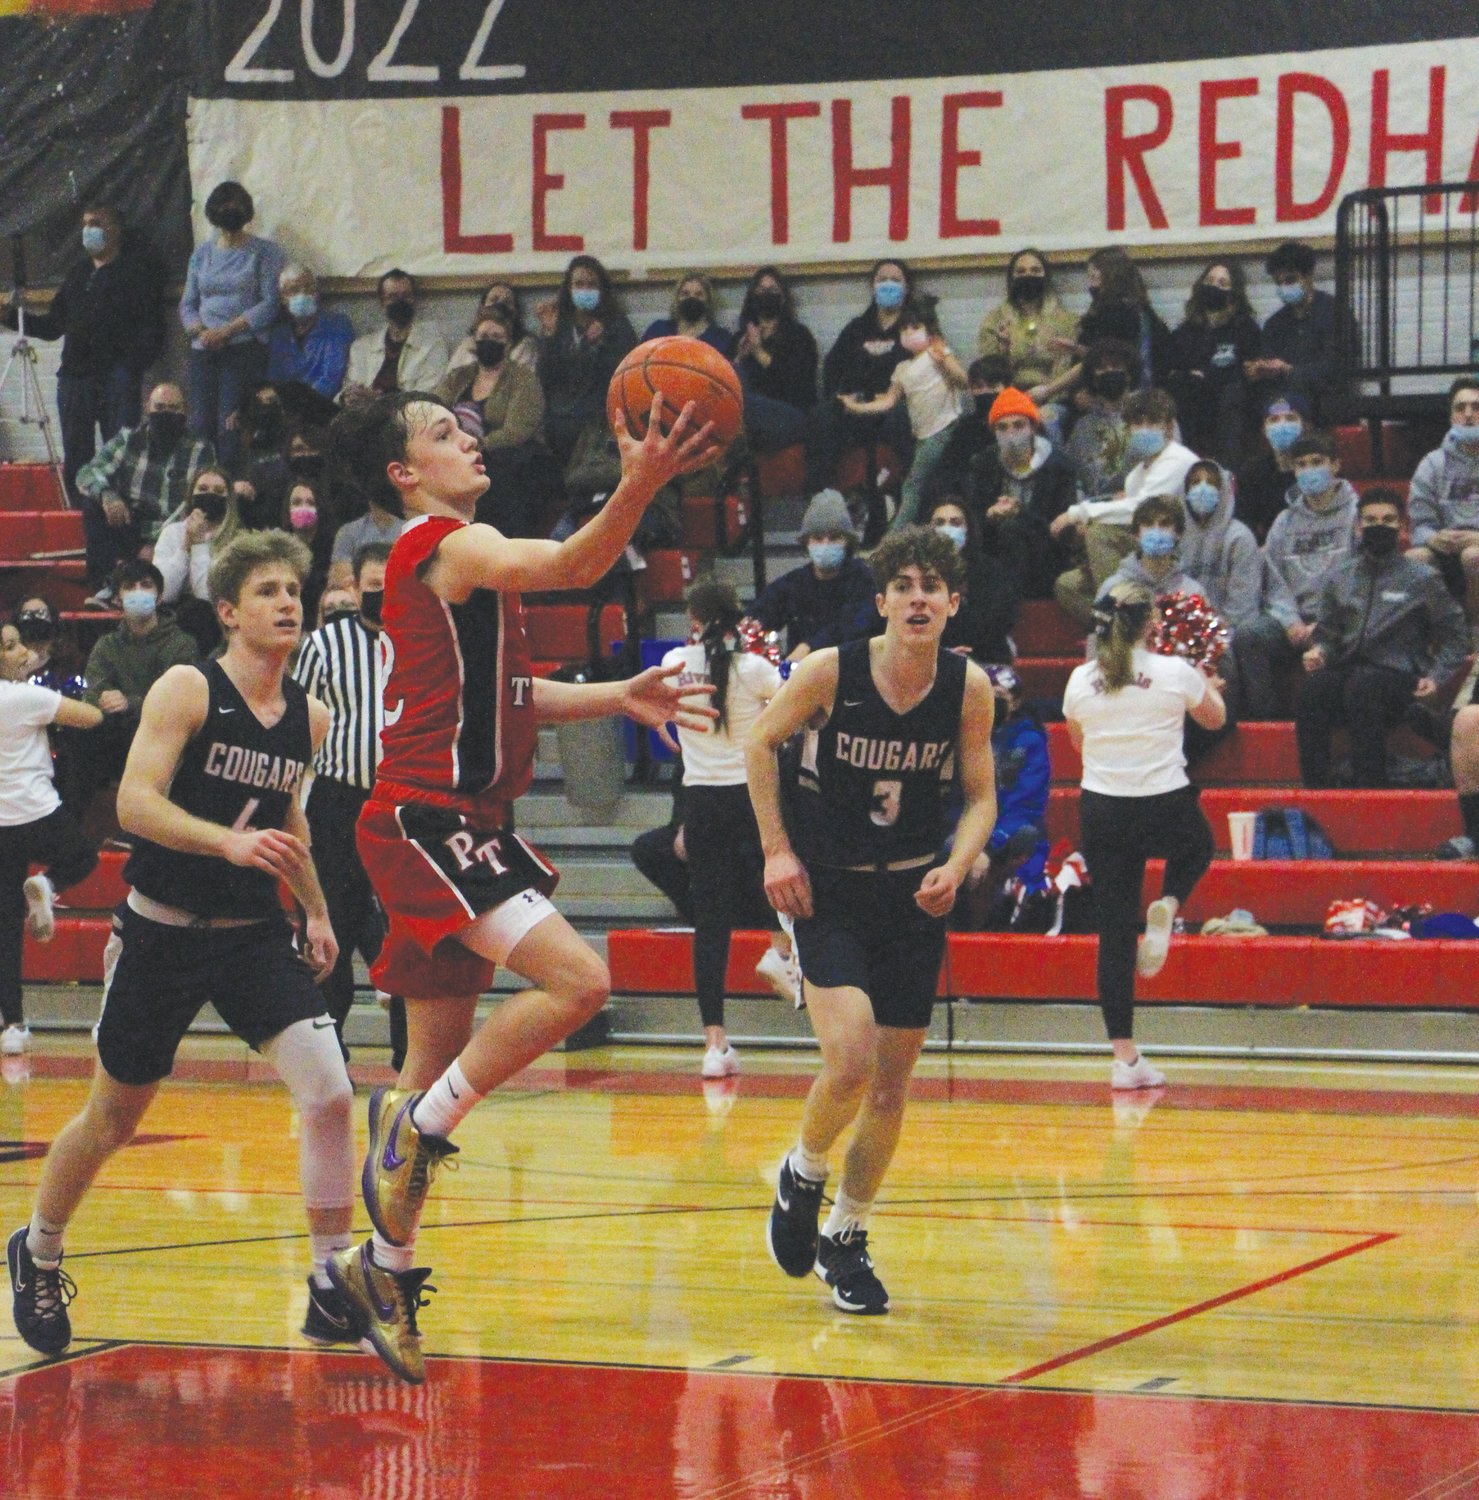 Sophomore guard Brody Moore scores a fast-break layup in the second half for the Rivals.